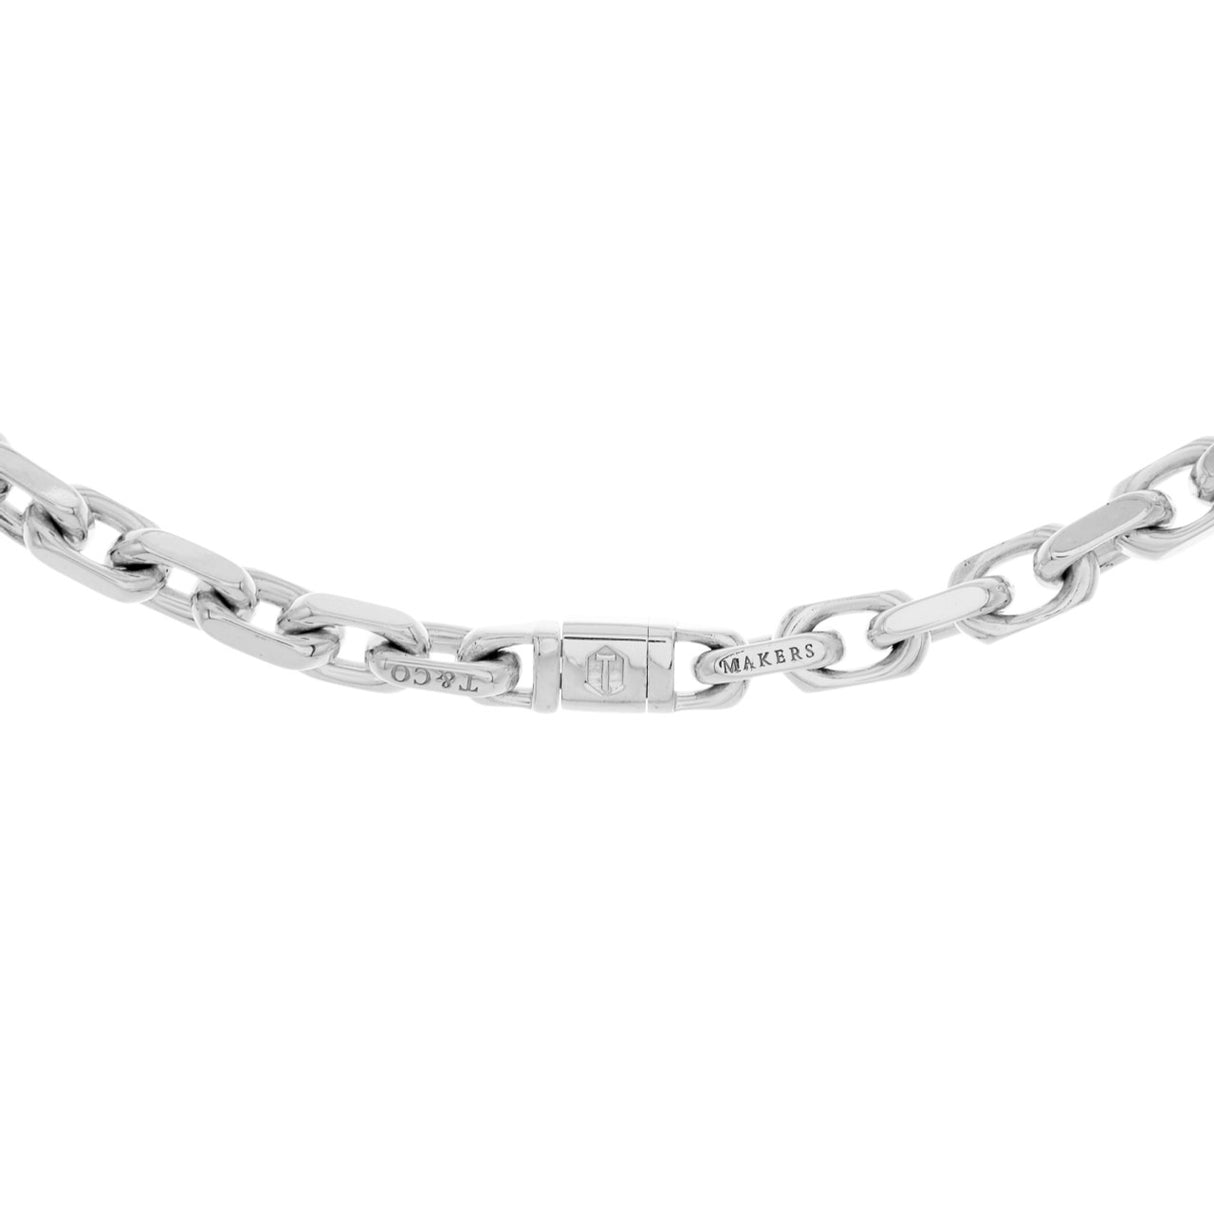 Tiffany & Co. Sterling Silver Makers Chain Necklace